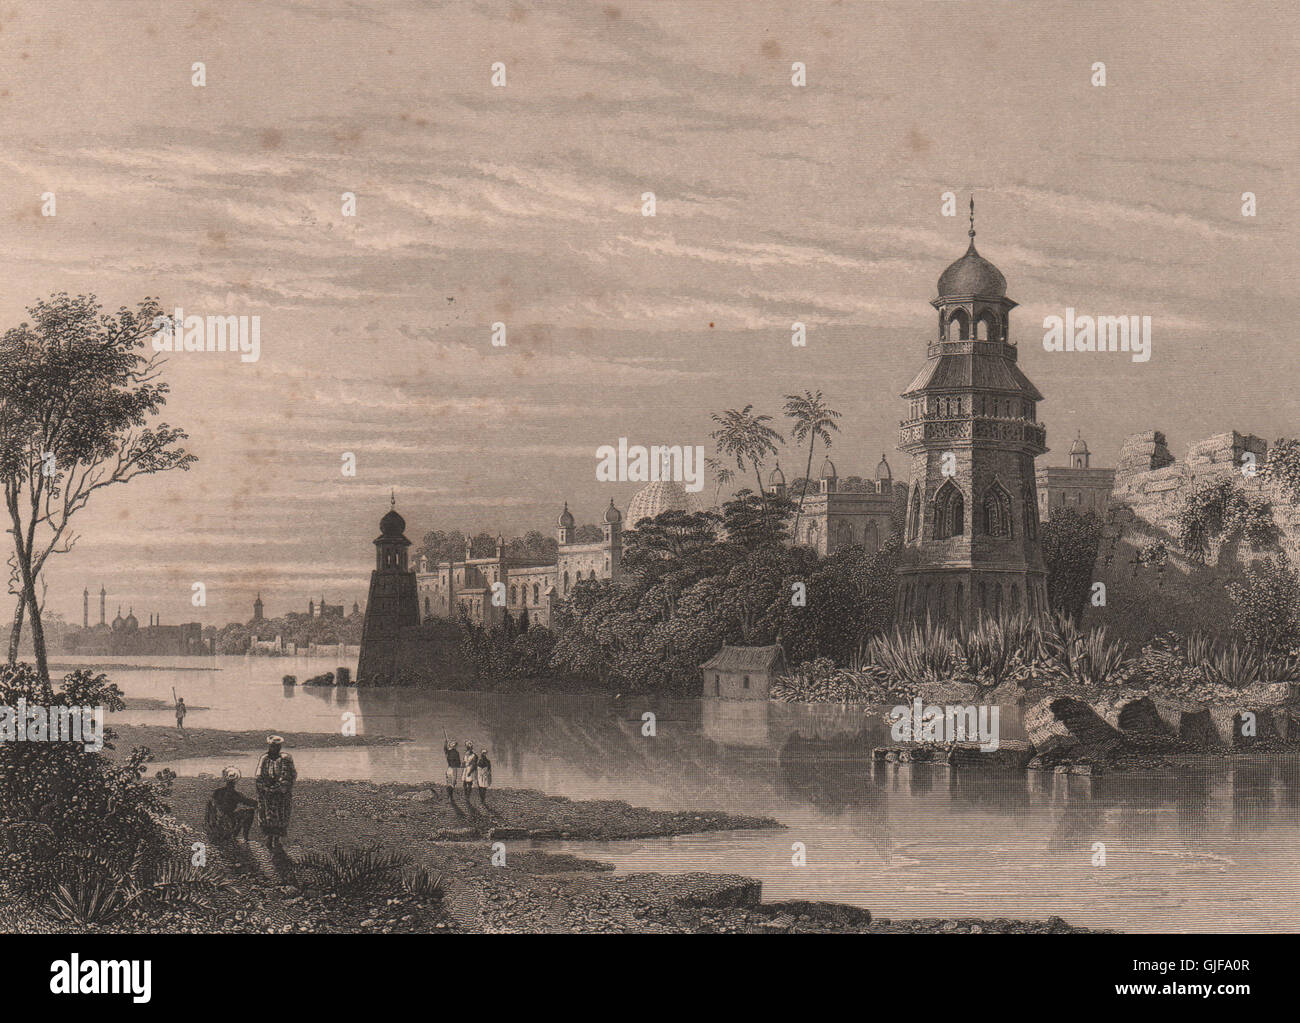 BRITISH INDIA. Delhi from the river showing the King's Palace (Red Fort) , 1858 Stock Photo